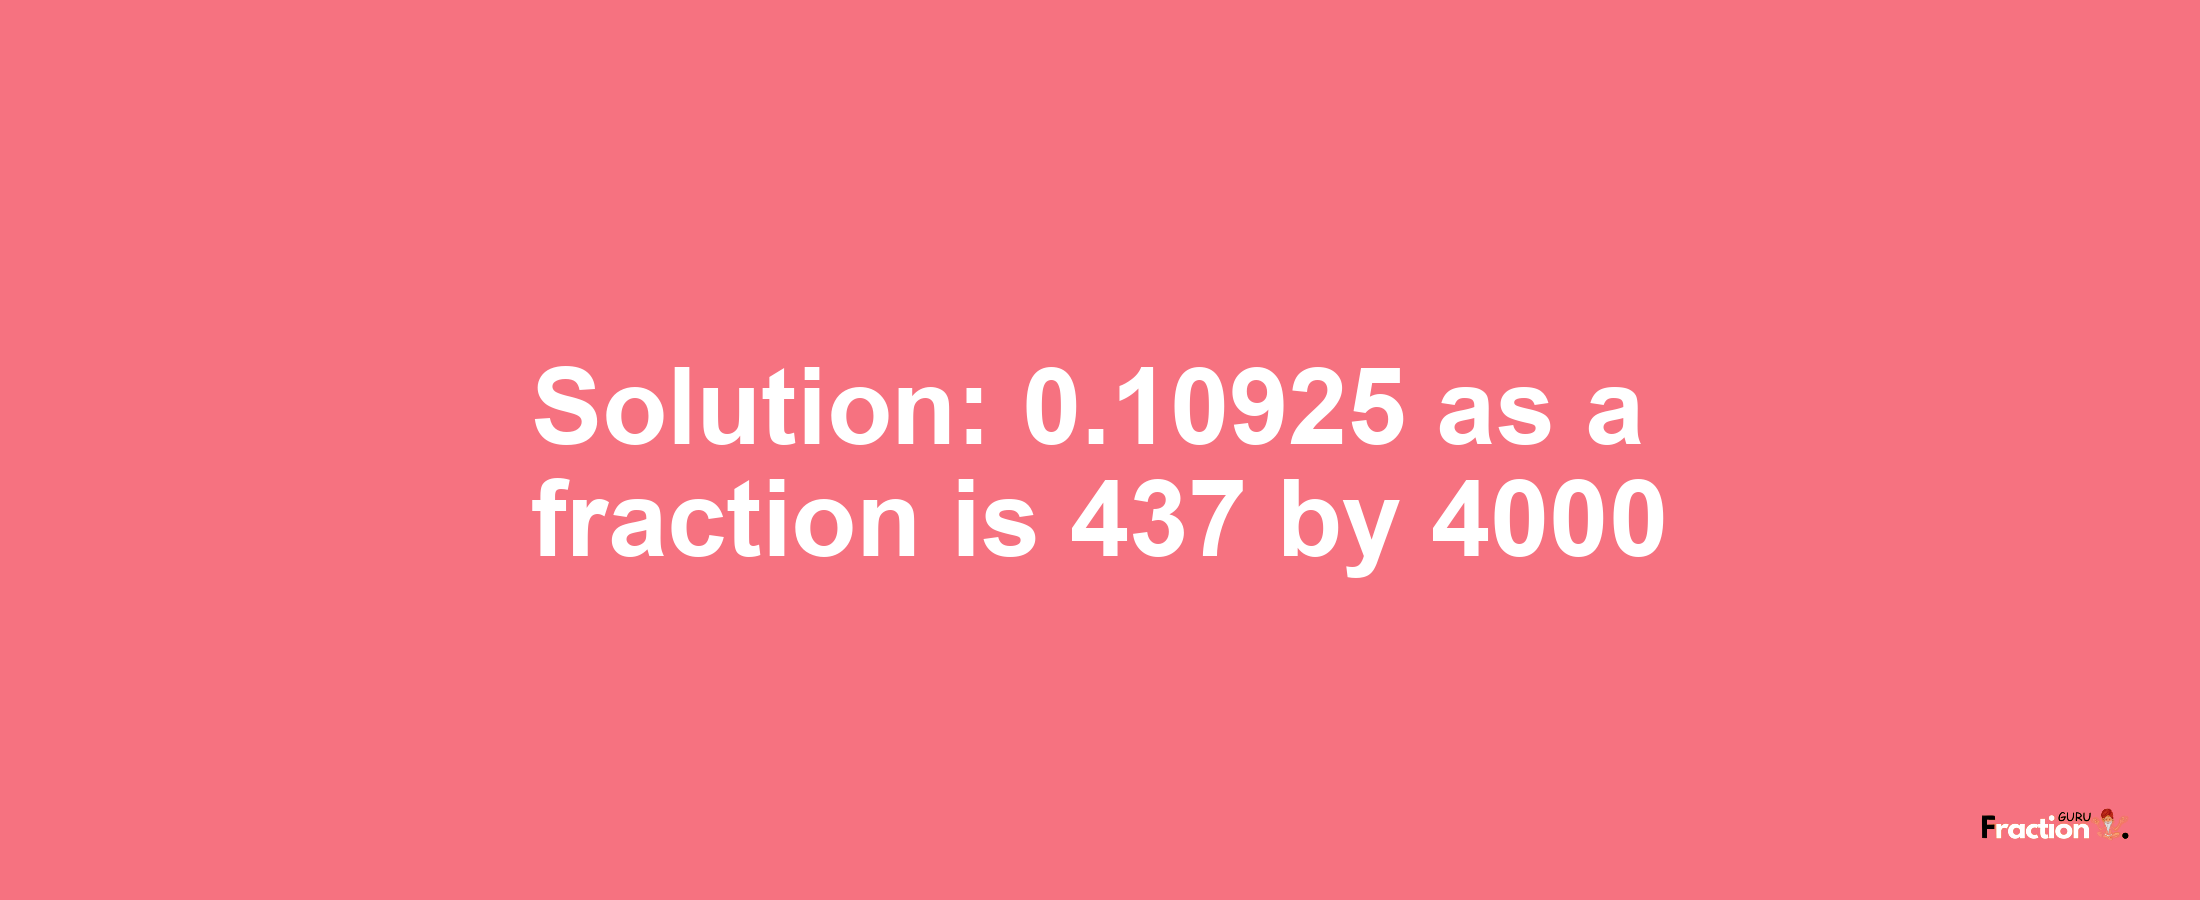 Solution:0.10925 as a fraction is 437/4000